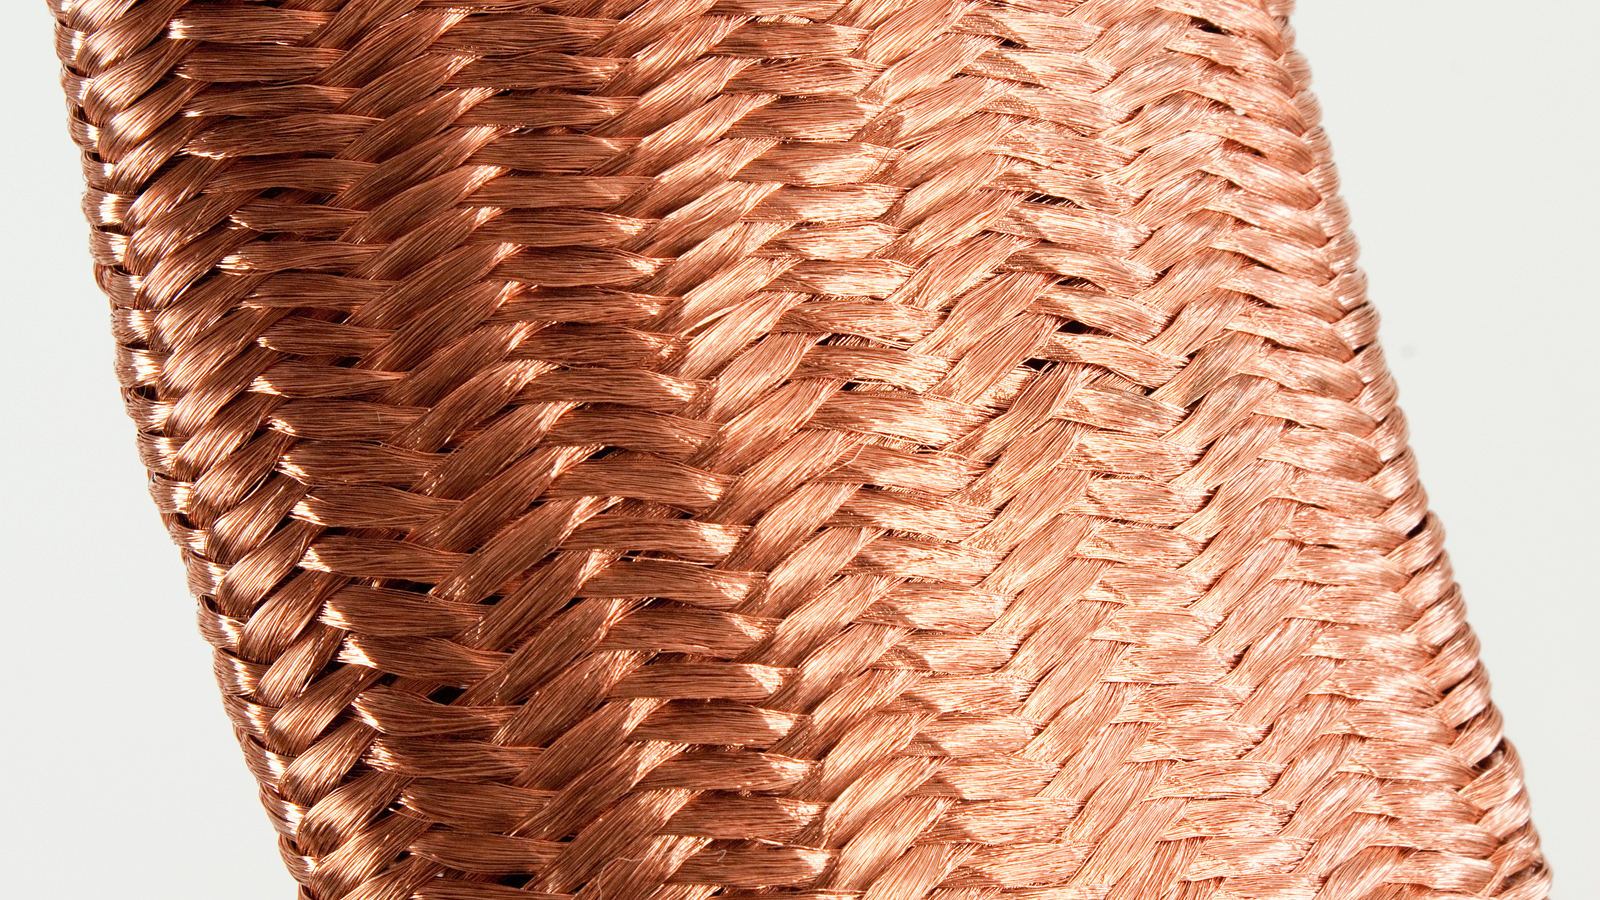 Detail of copper knit. Beautiful, isn’t it? We think so!